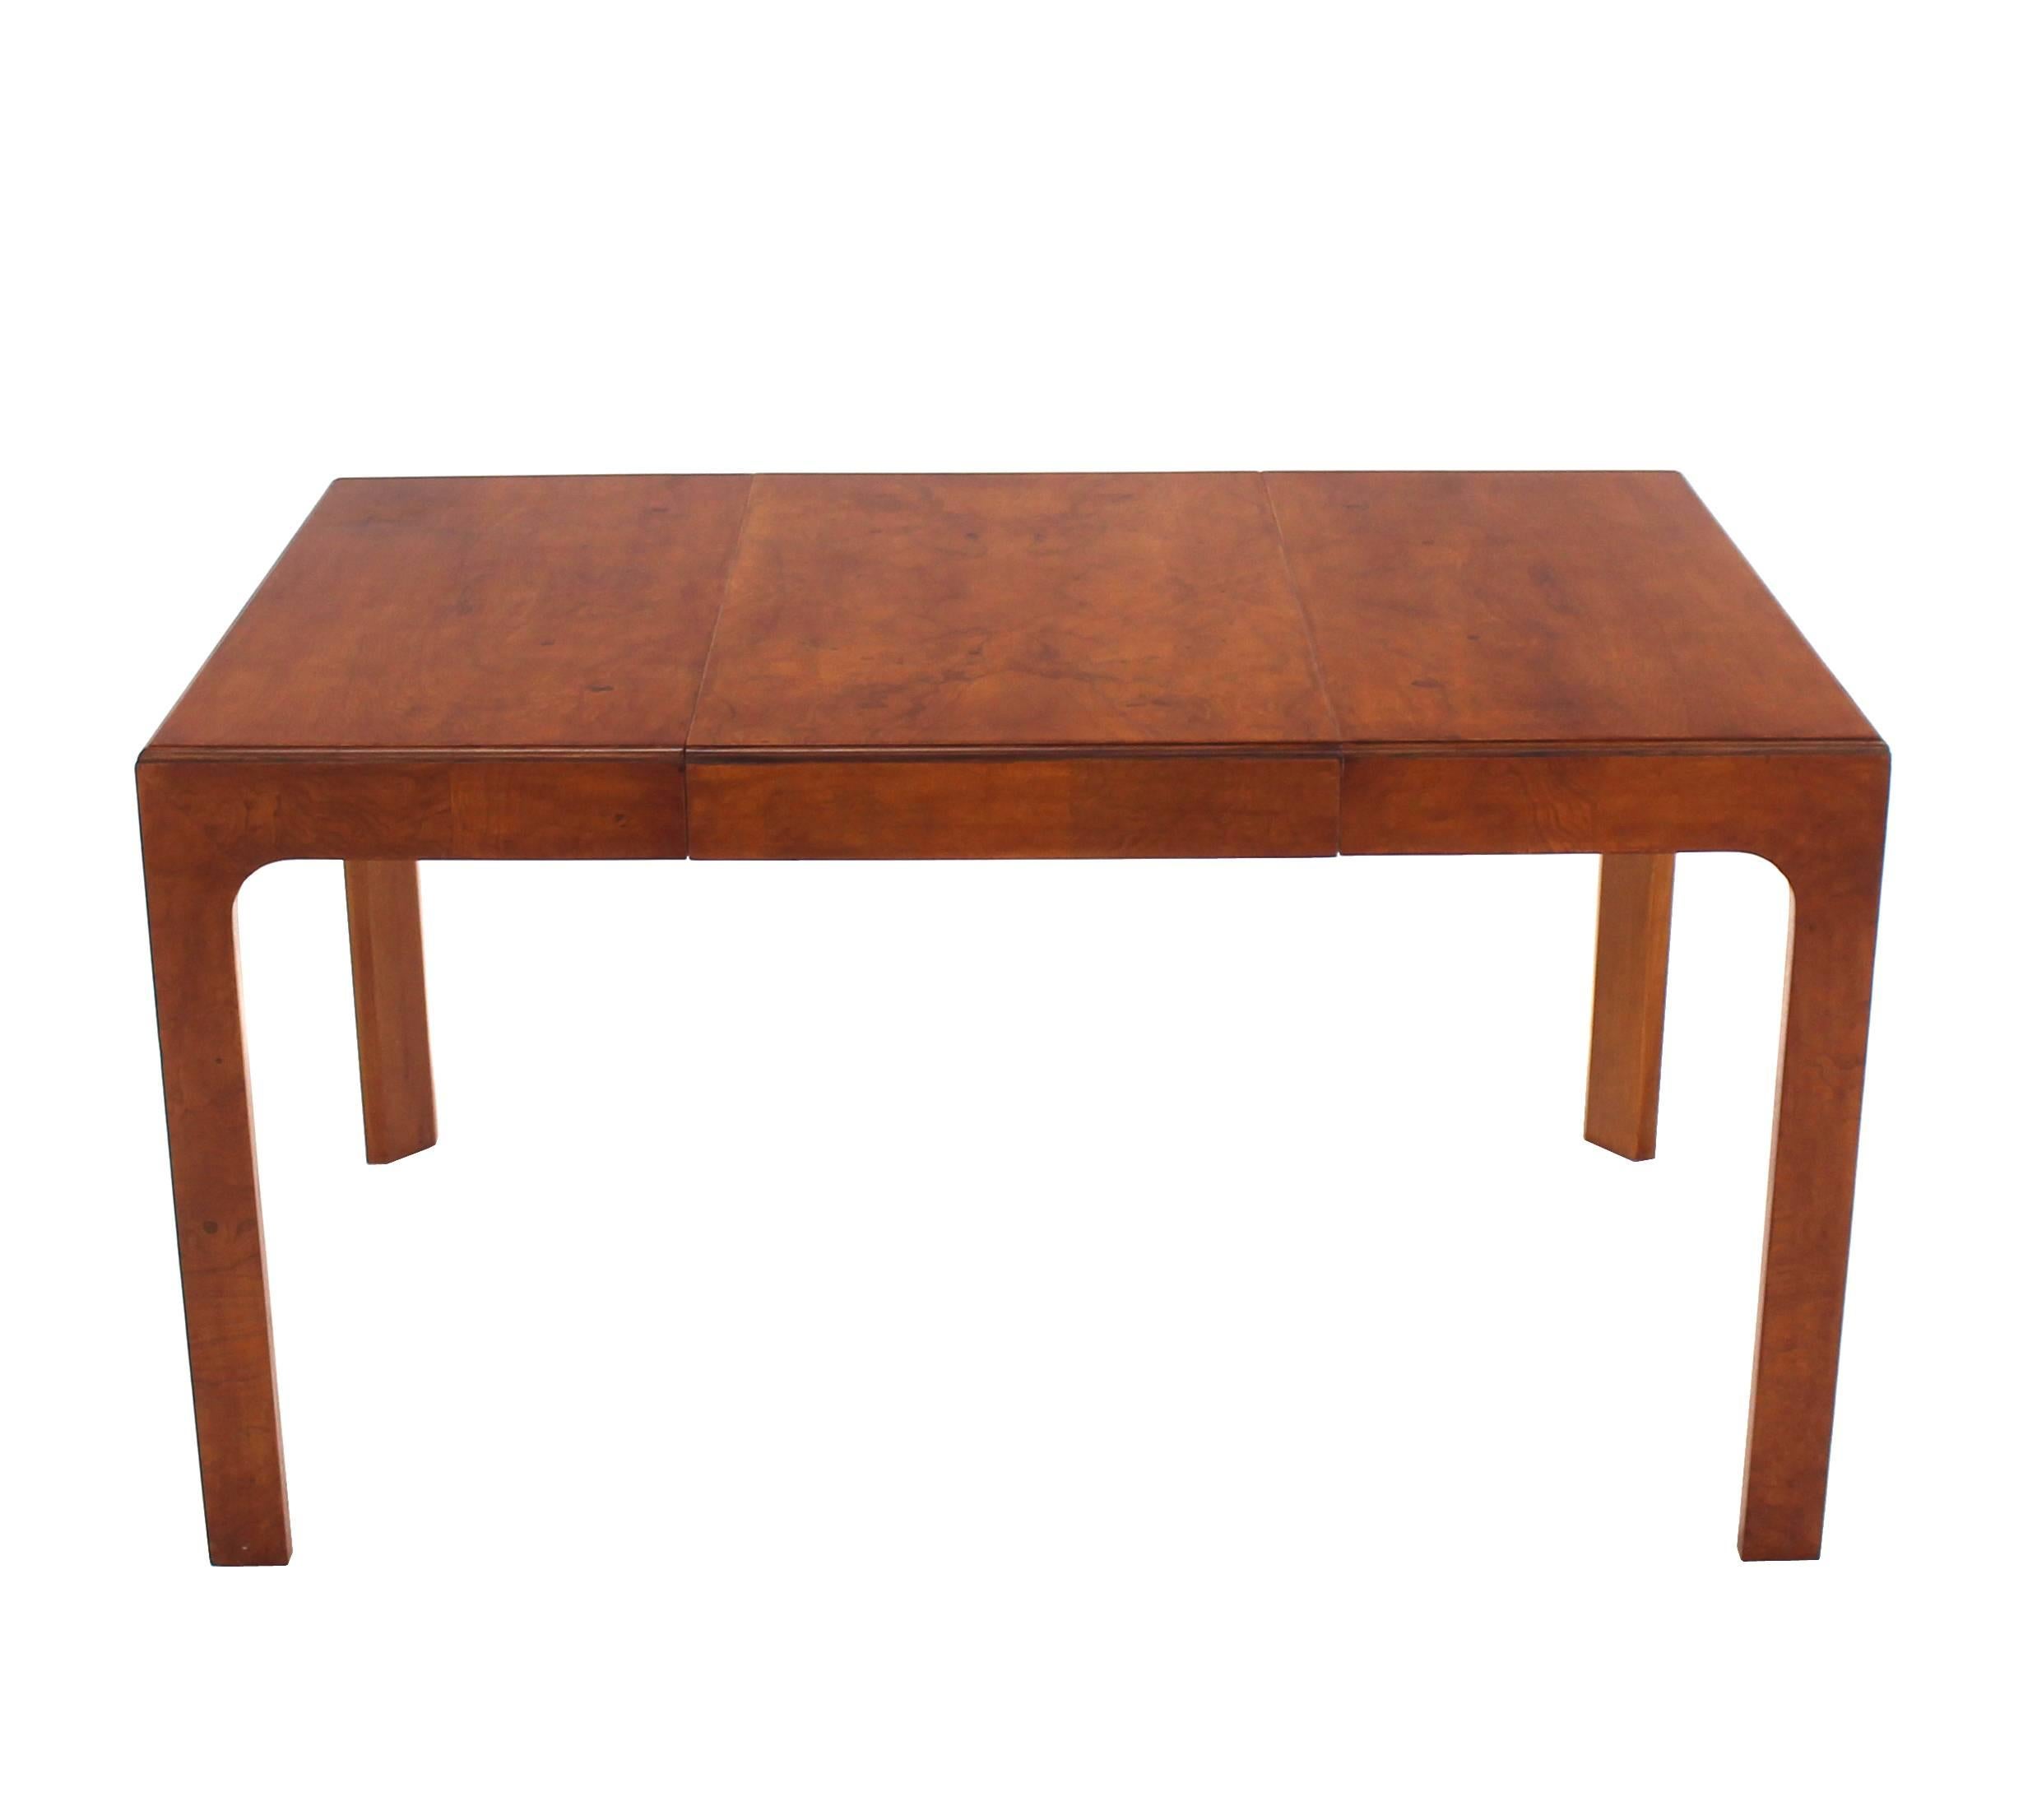 Henredon Mid-Century Modern square dining game table with 1 x 20